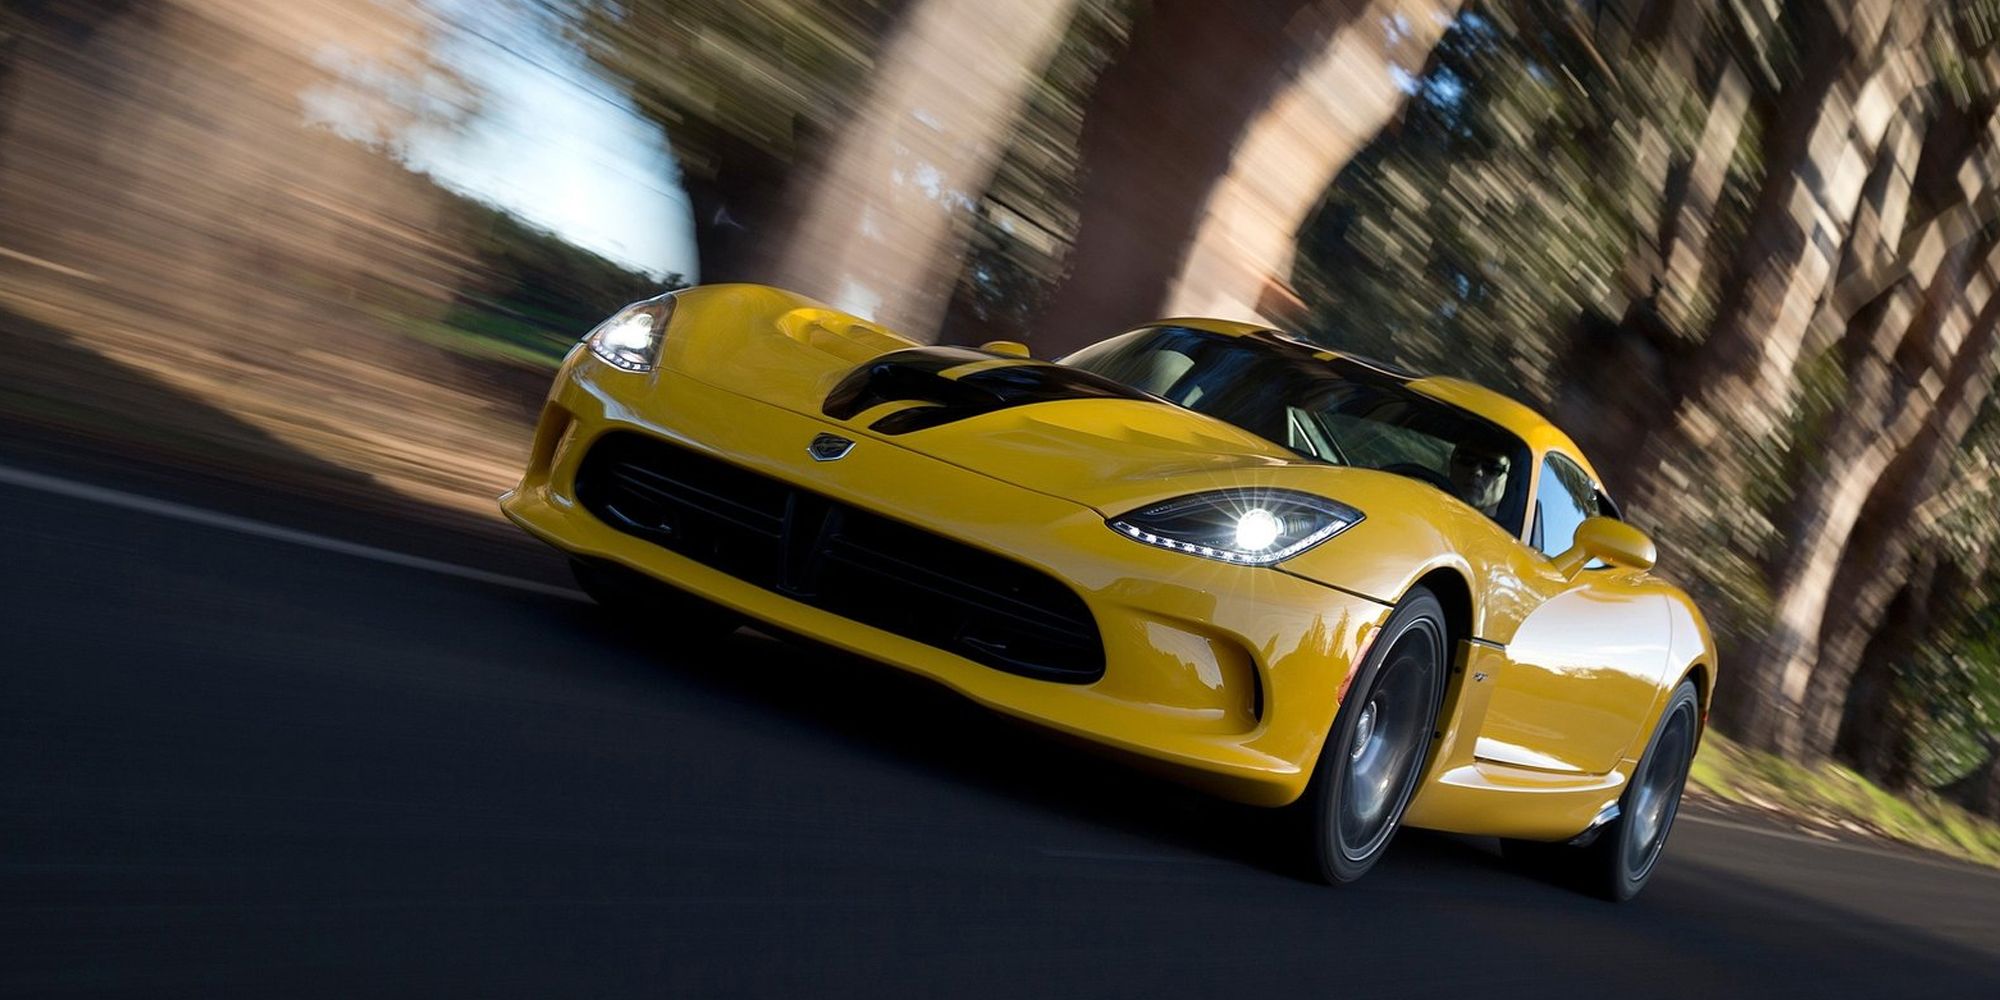 The front of a yellow Viper in motion